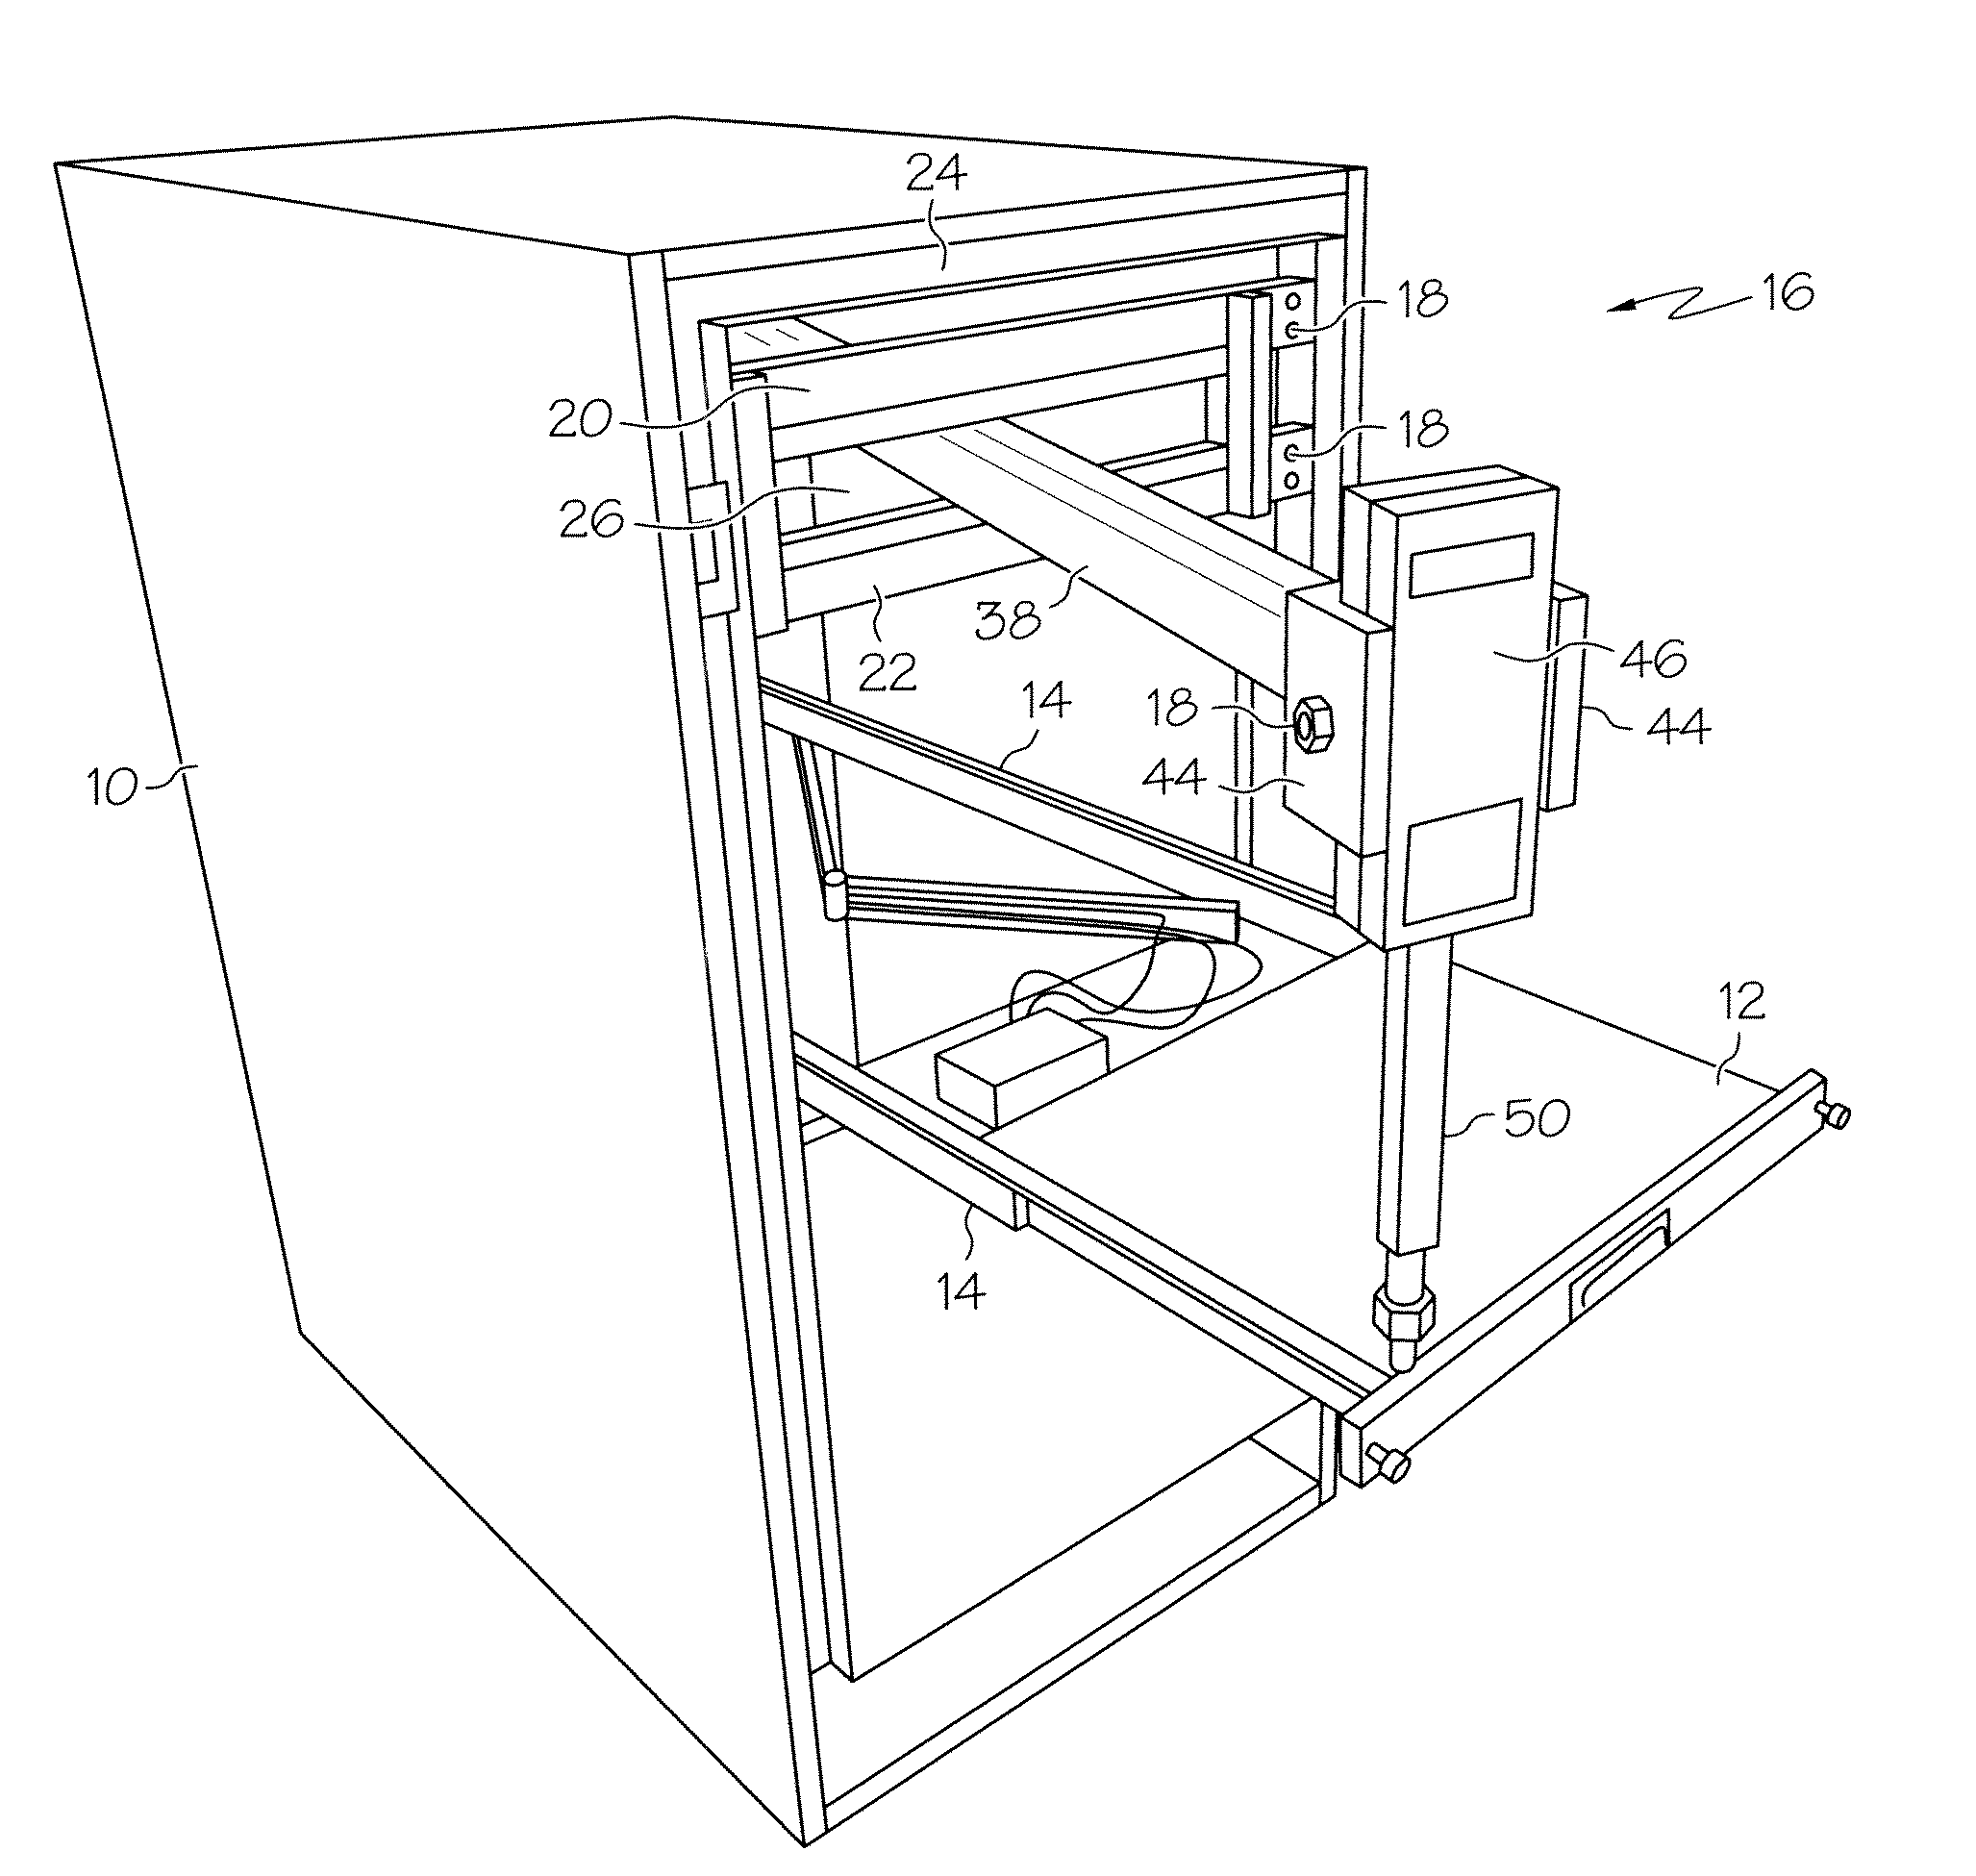 Method for strength testing of drawers in computer rack systems